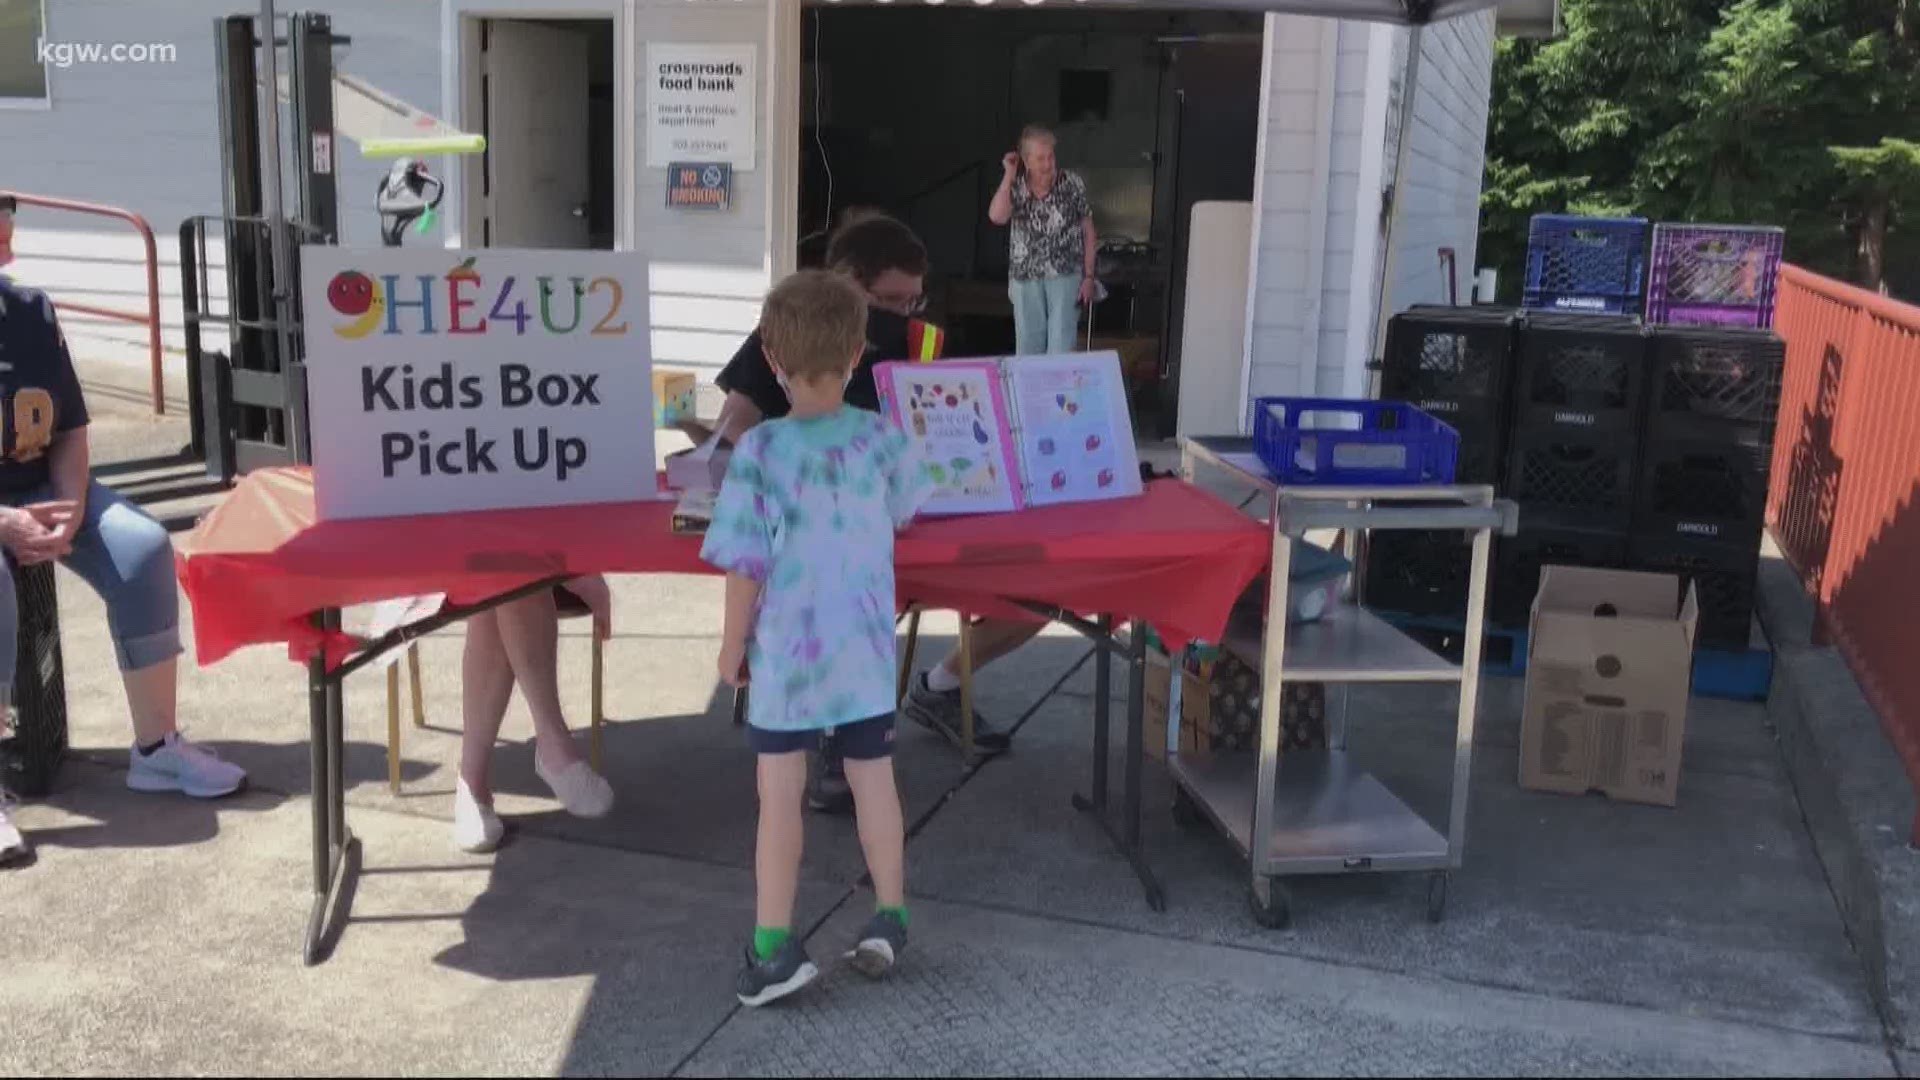 A Portland food bank is giving out special boxes to kids to help them learn fun and healthy meals.